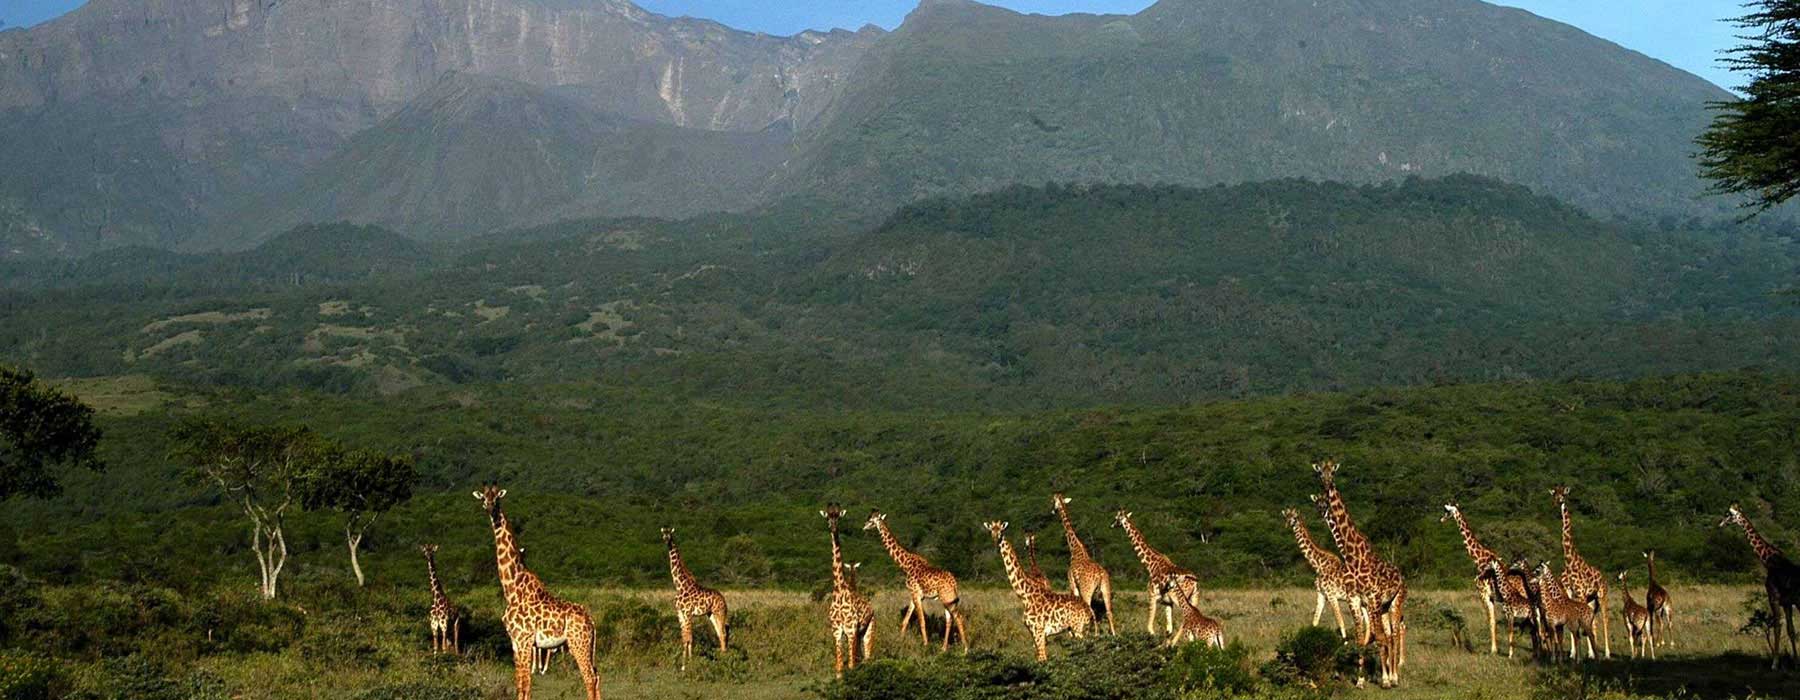 Arusha National Park Day Trip 